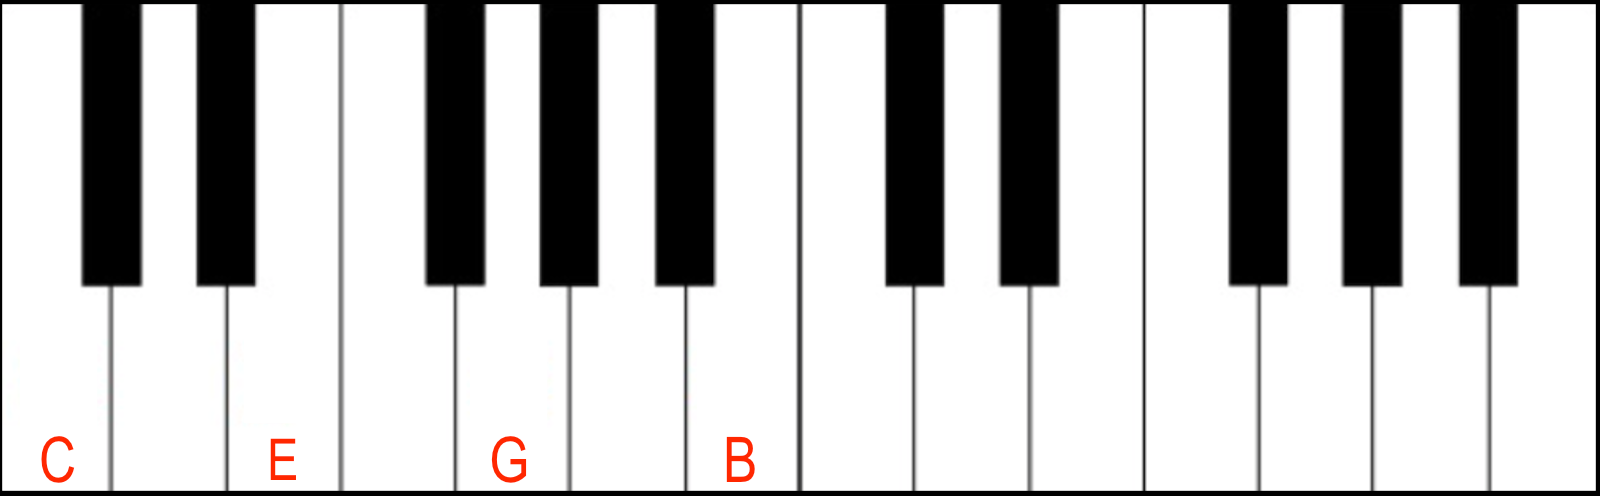 Jazz Piano Chords: Major 7th Chord in Root Position